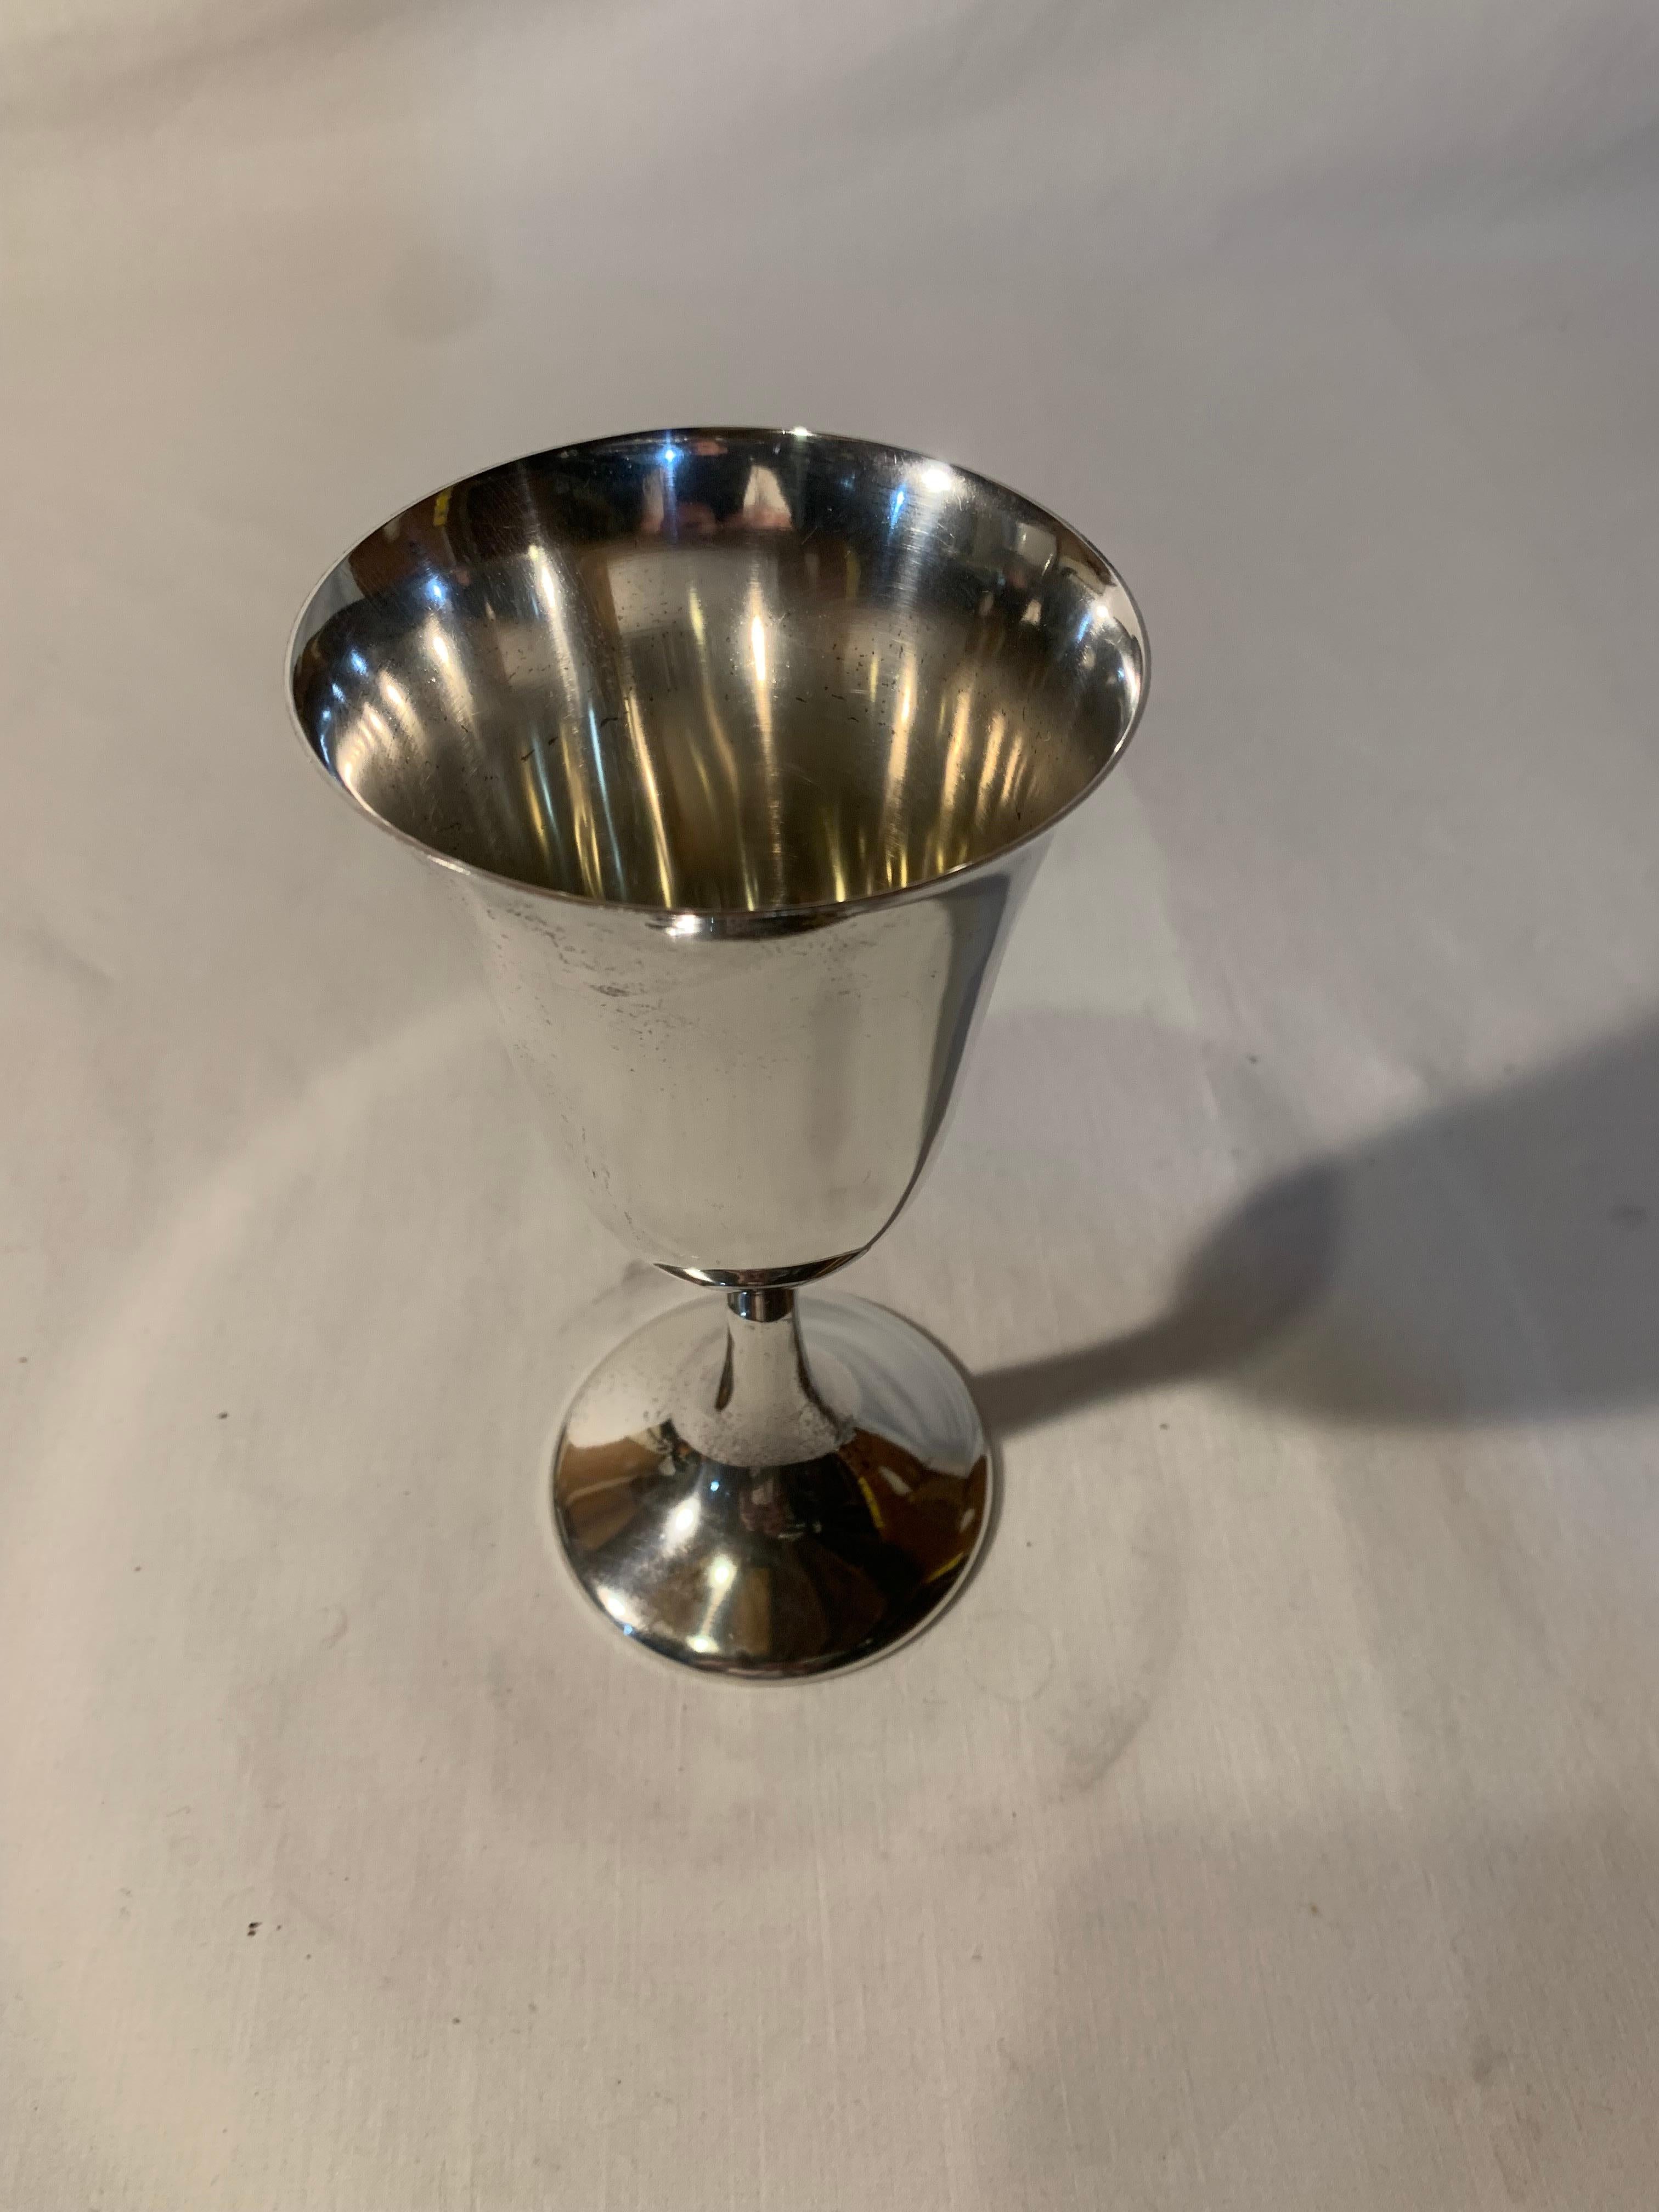 A.G. Schultz & Co. Sterling goblets/wine glasses (9), mid 20th c., H 6 1/2